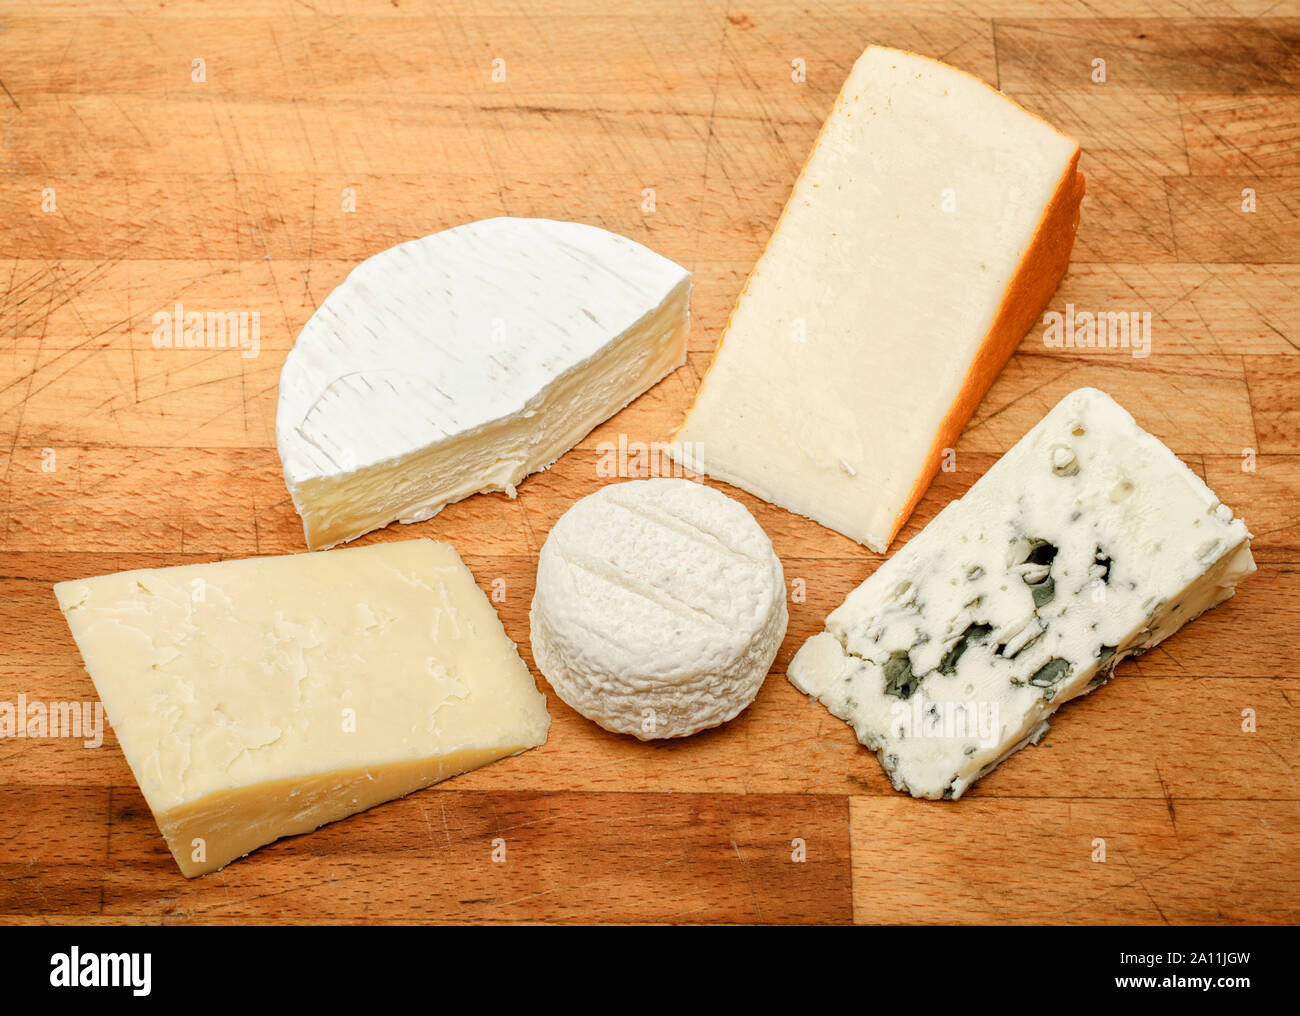 Cheeseboard with a selection of cheese Stock Photo